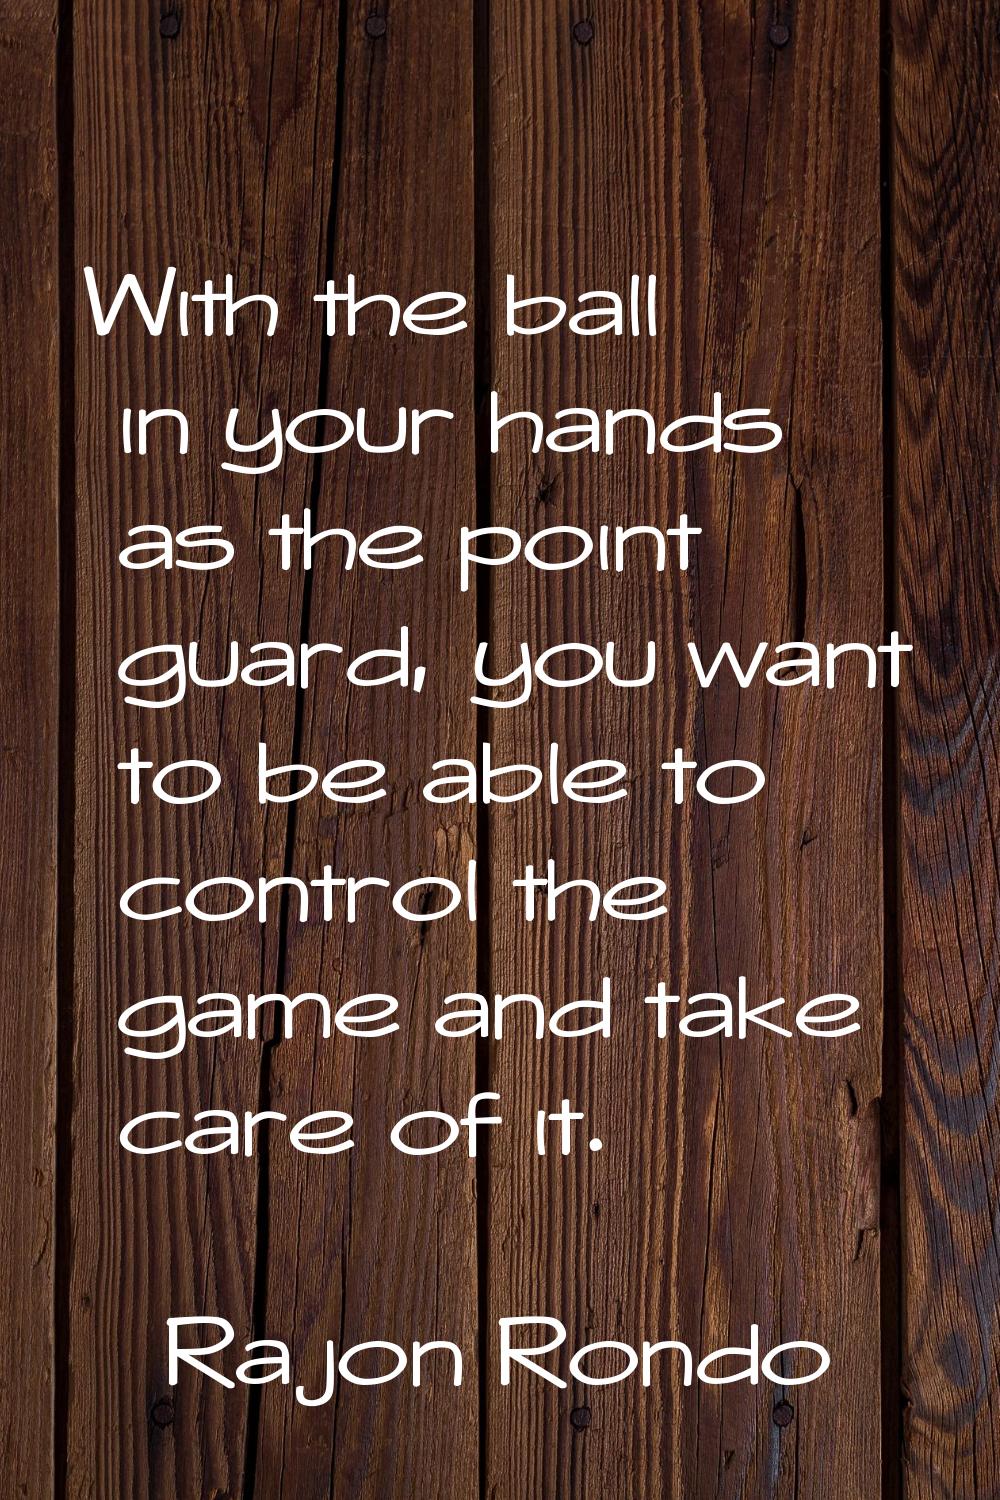 With the ball in your hands as the point guard, you want to be able to control the game and take ca